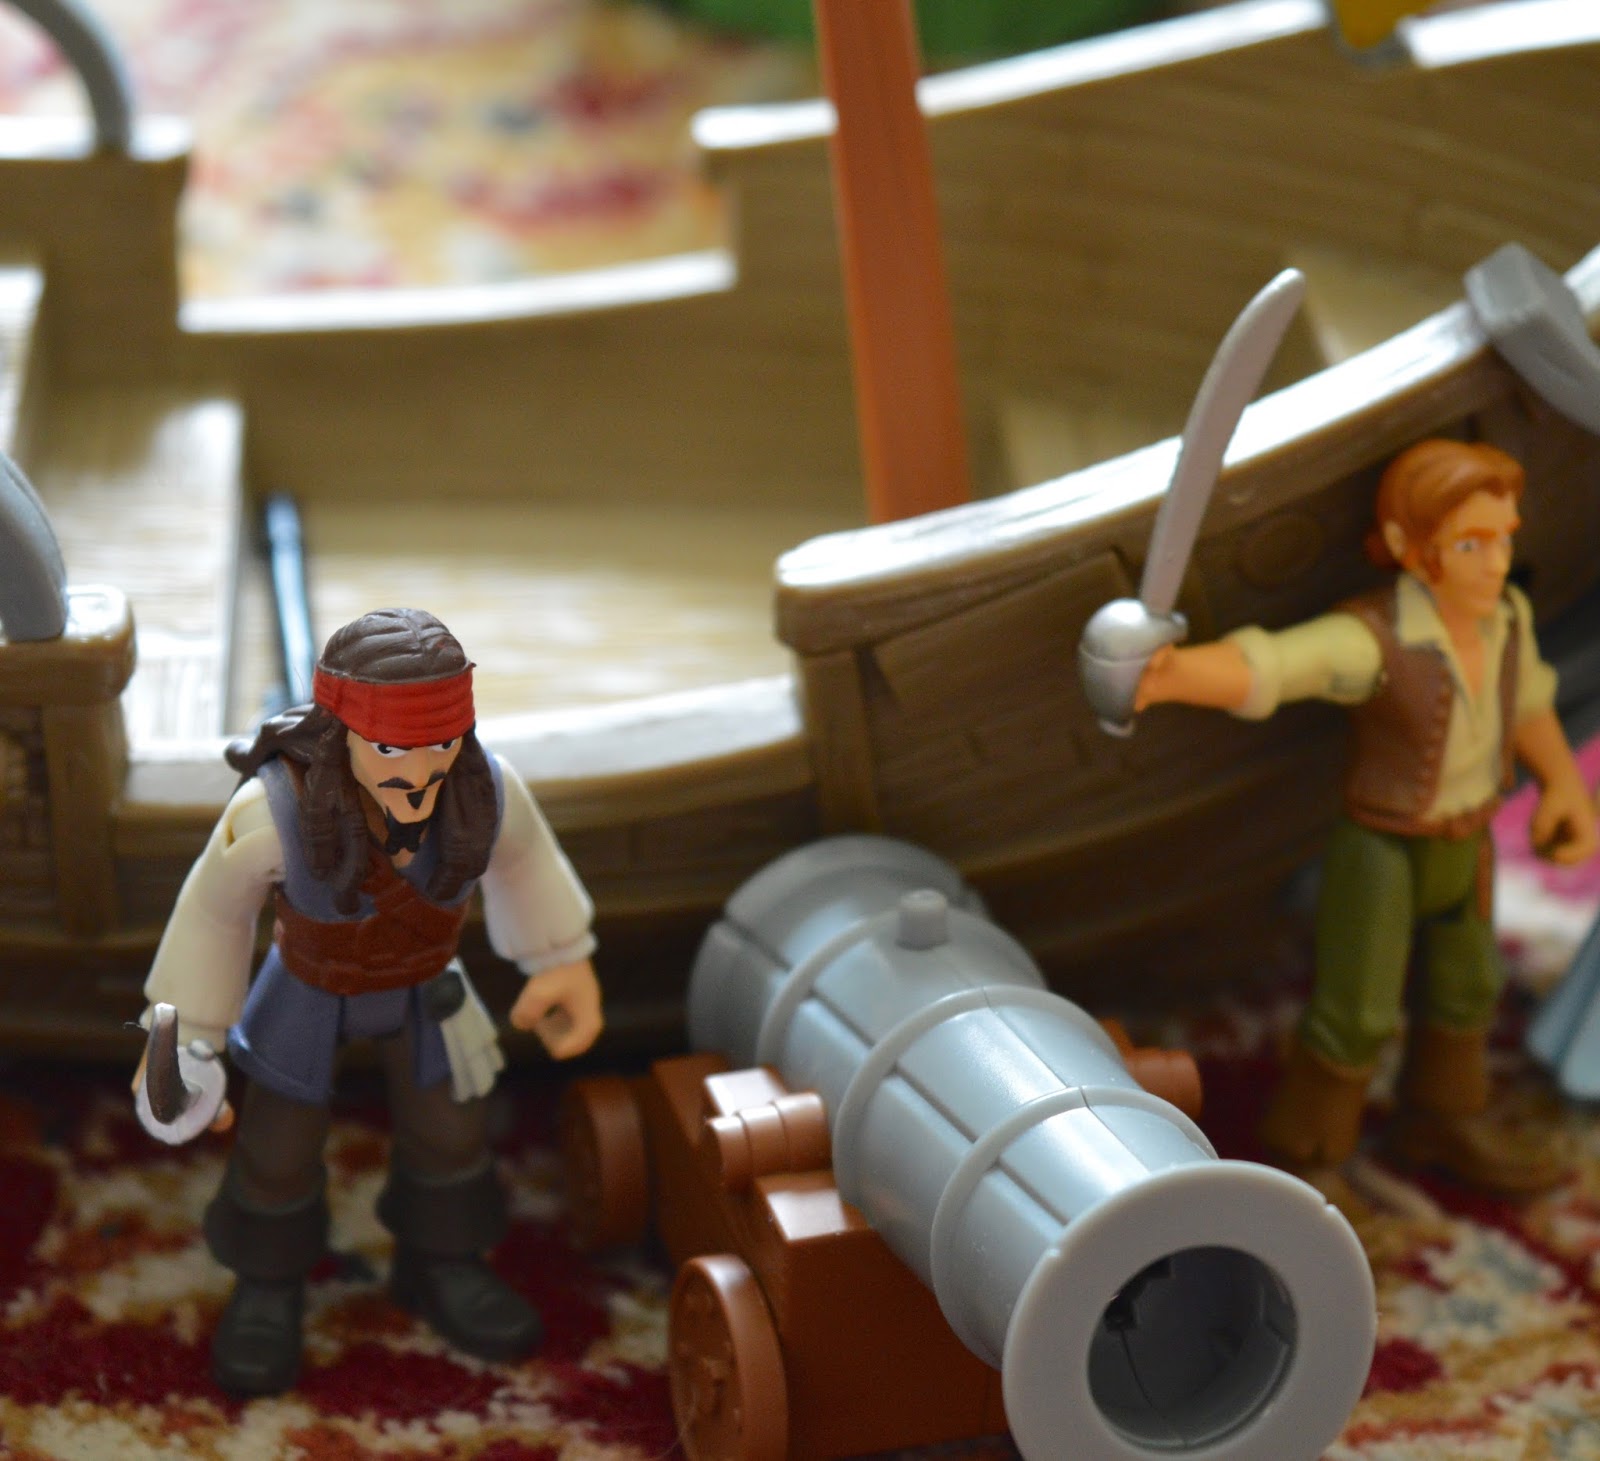 pirate ship playsets